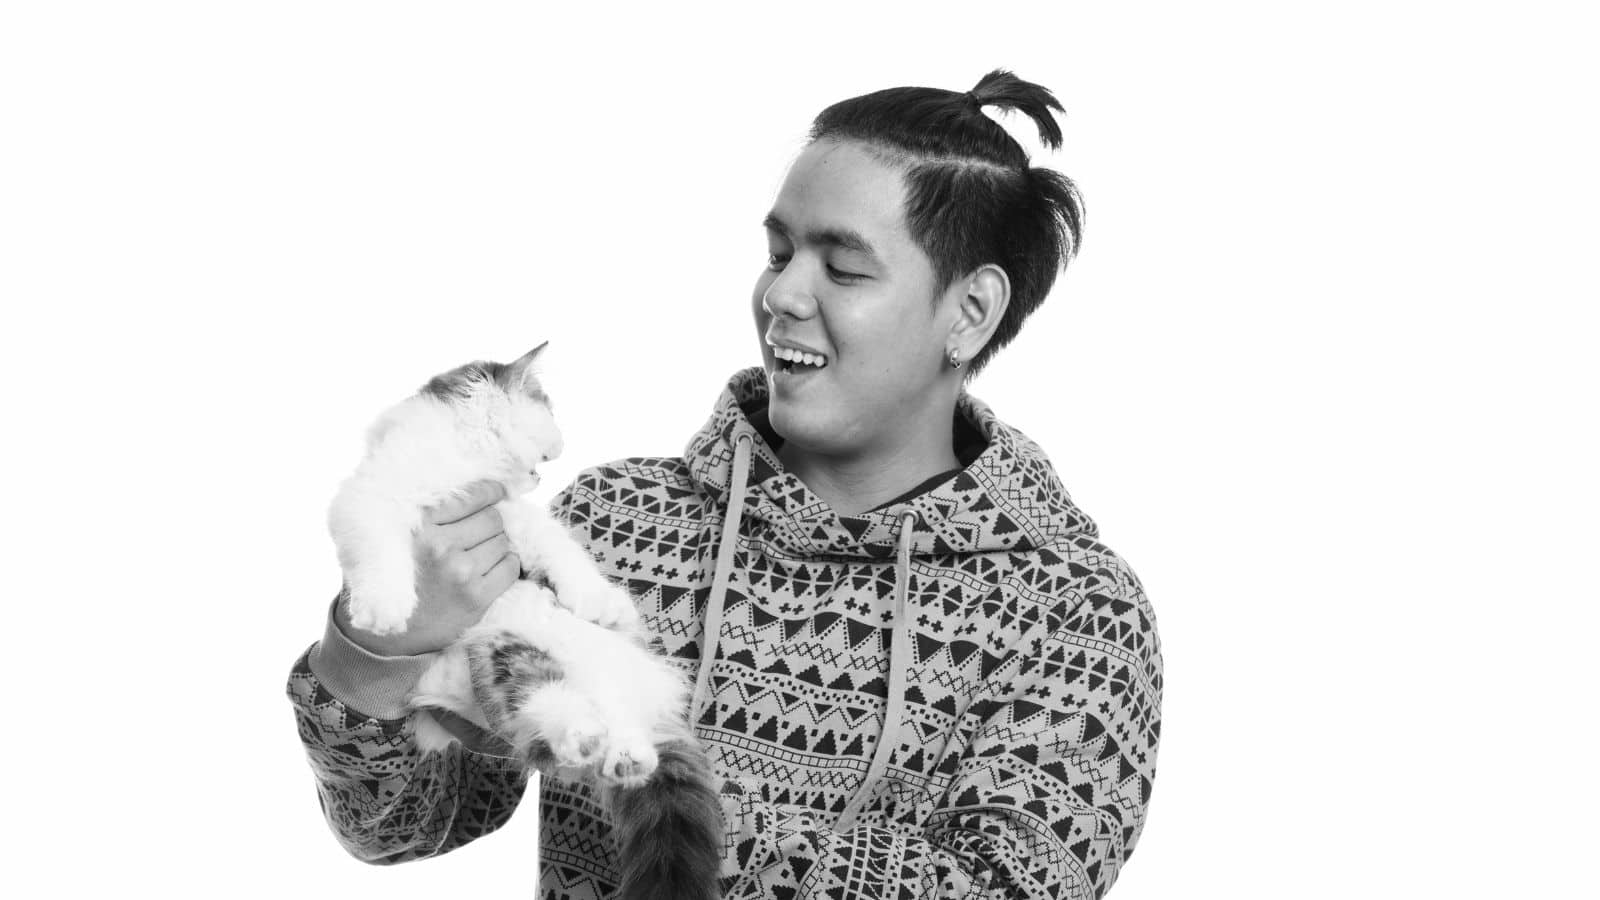 Studio shot of young happy Asian man smiling while holding cute cat